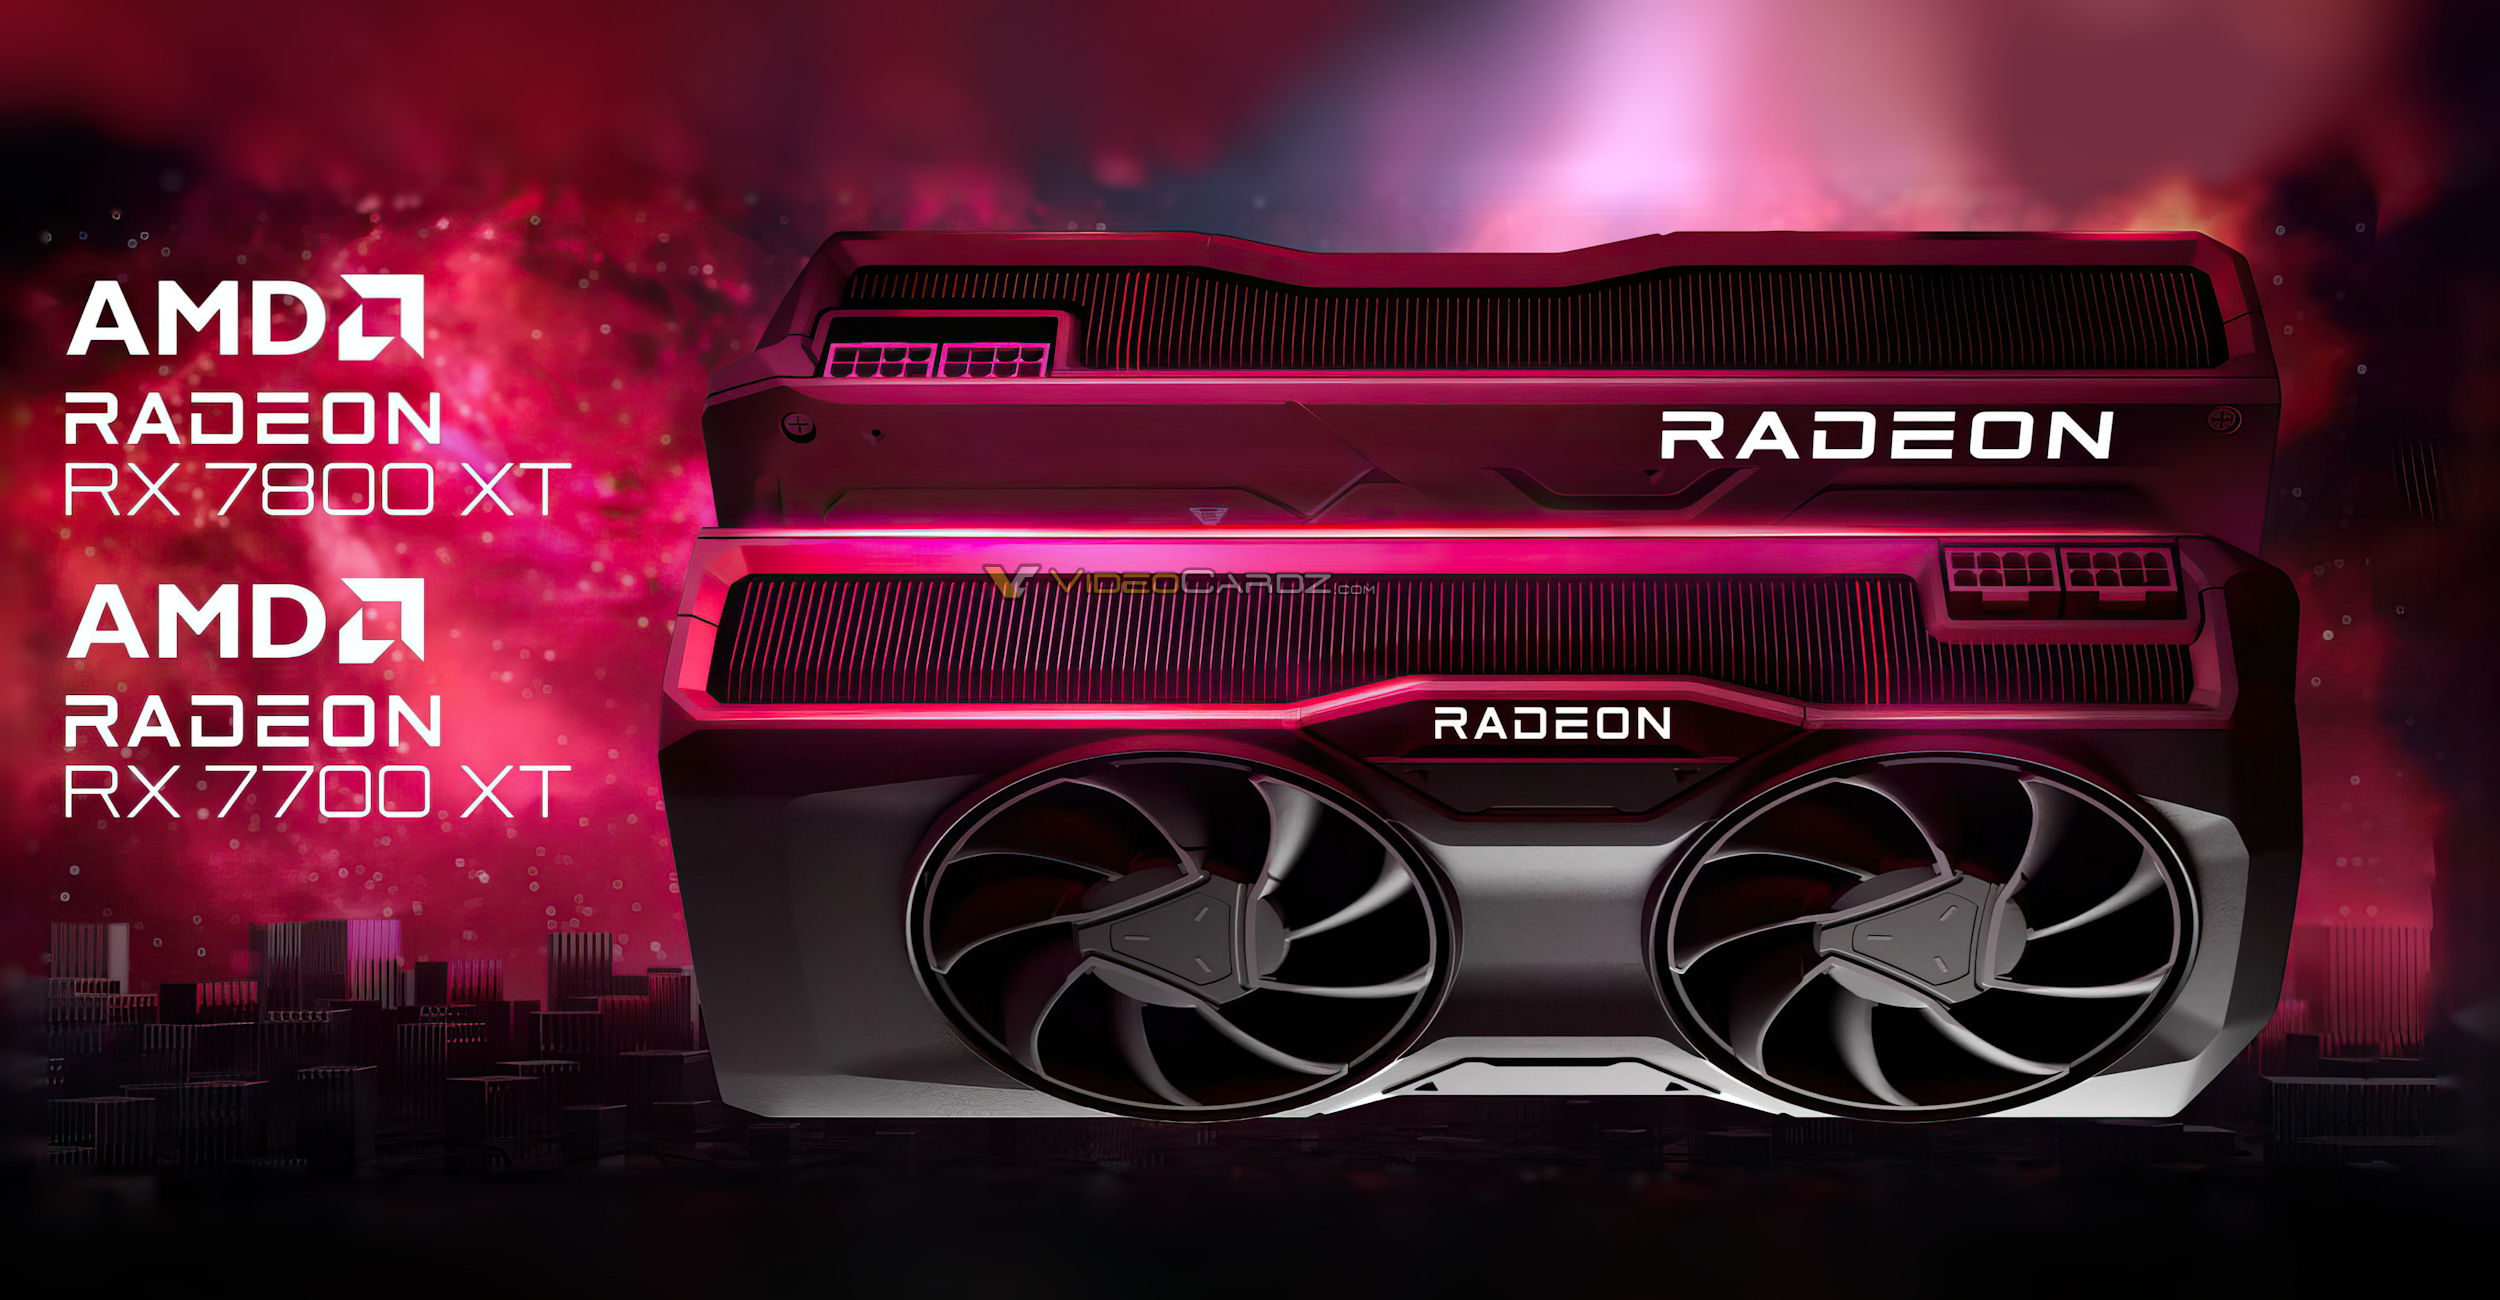 Gigabyte launches AMD Radeon RX 7800 XT and RX 7700 XT Gaming GPUs 